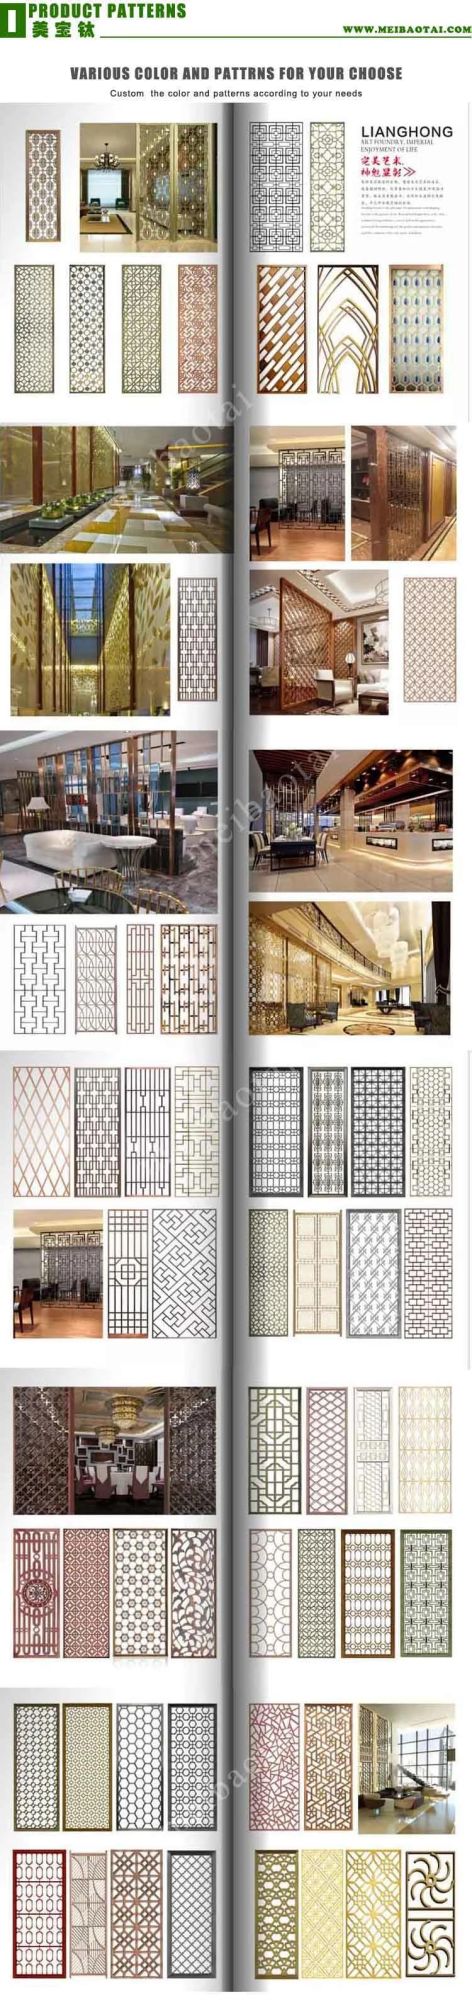 High Quality Modern Design Pattern Golden Customerized Aluminum Stainless Steel Decorative Room Screen Office Partition